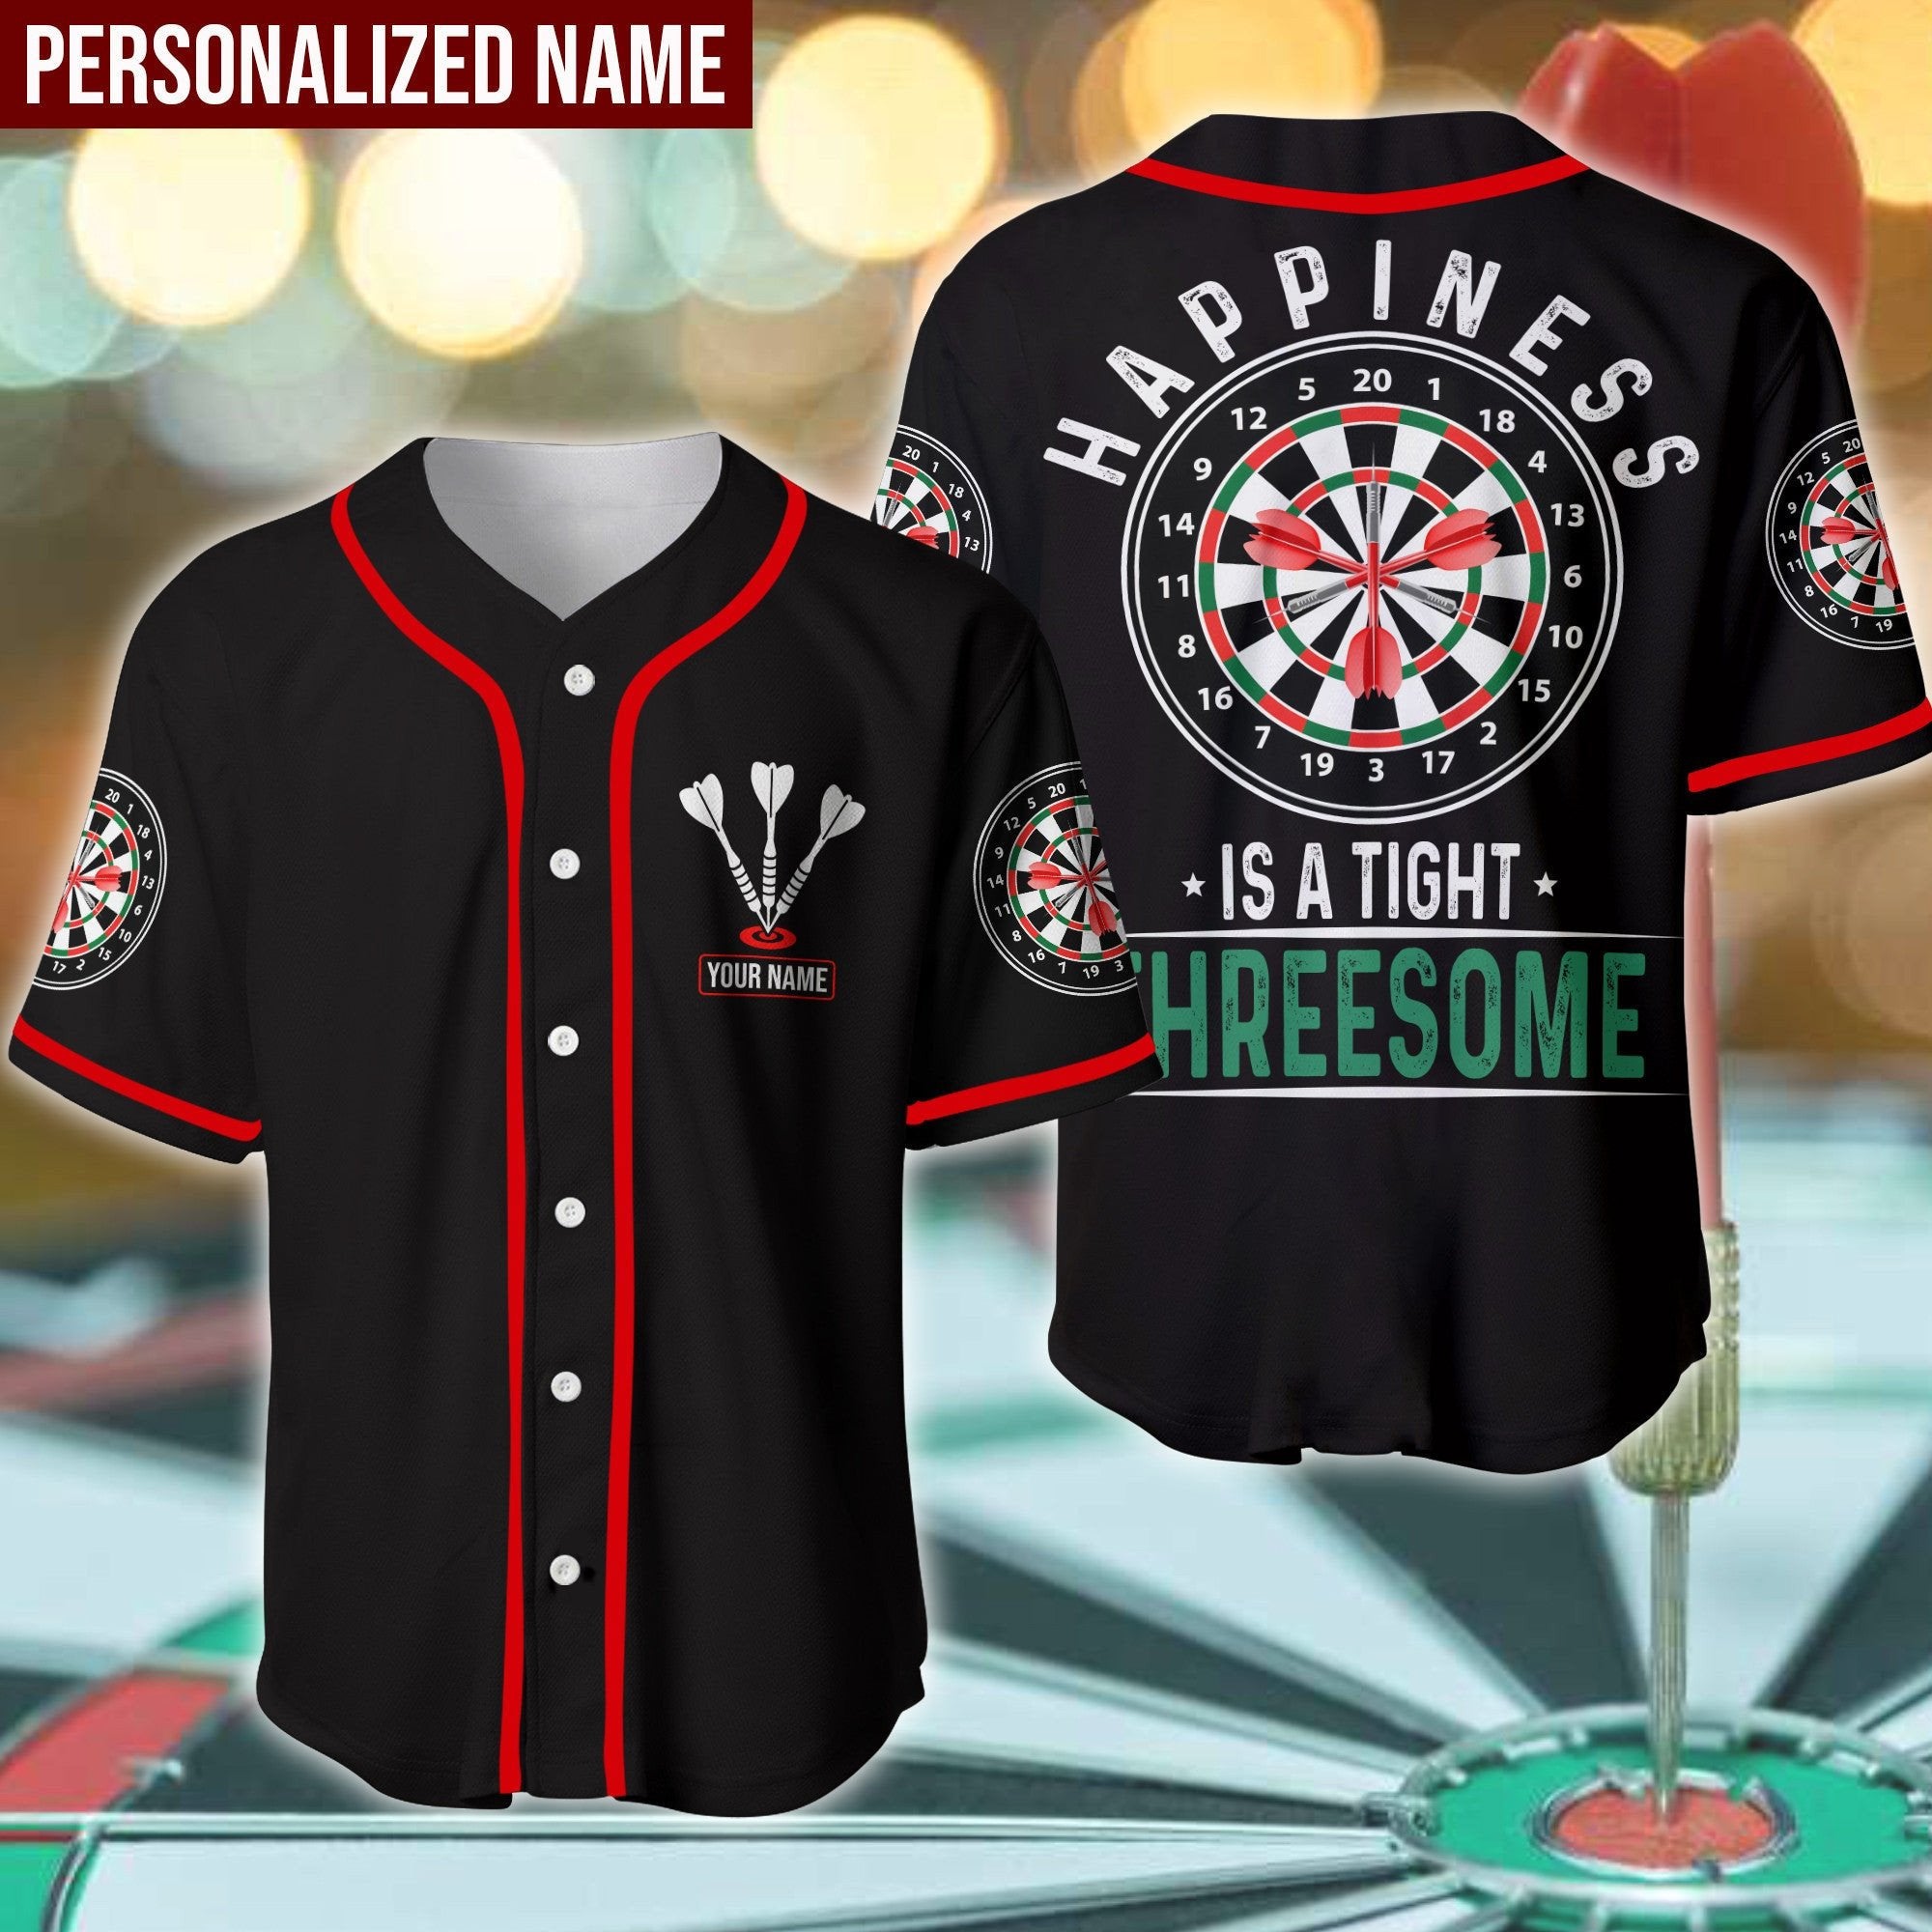 Darts Happiness Is A Tight Threesome Personalized Baseball Jersey/ Idea Gift for Dart Player